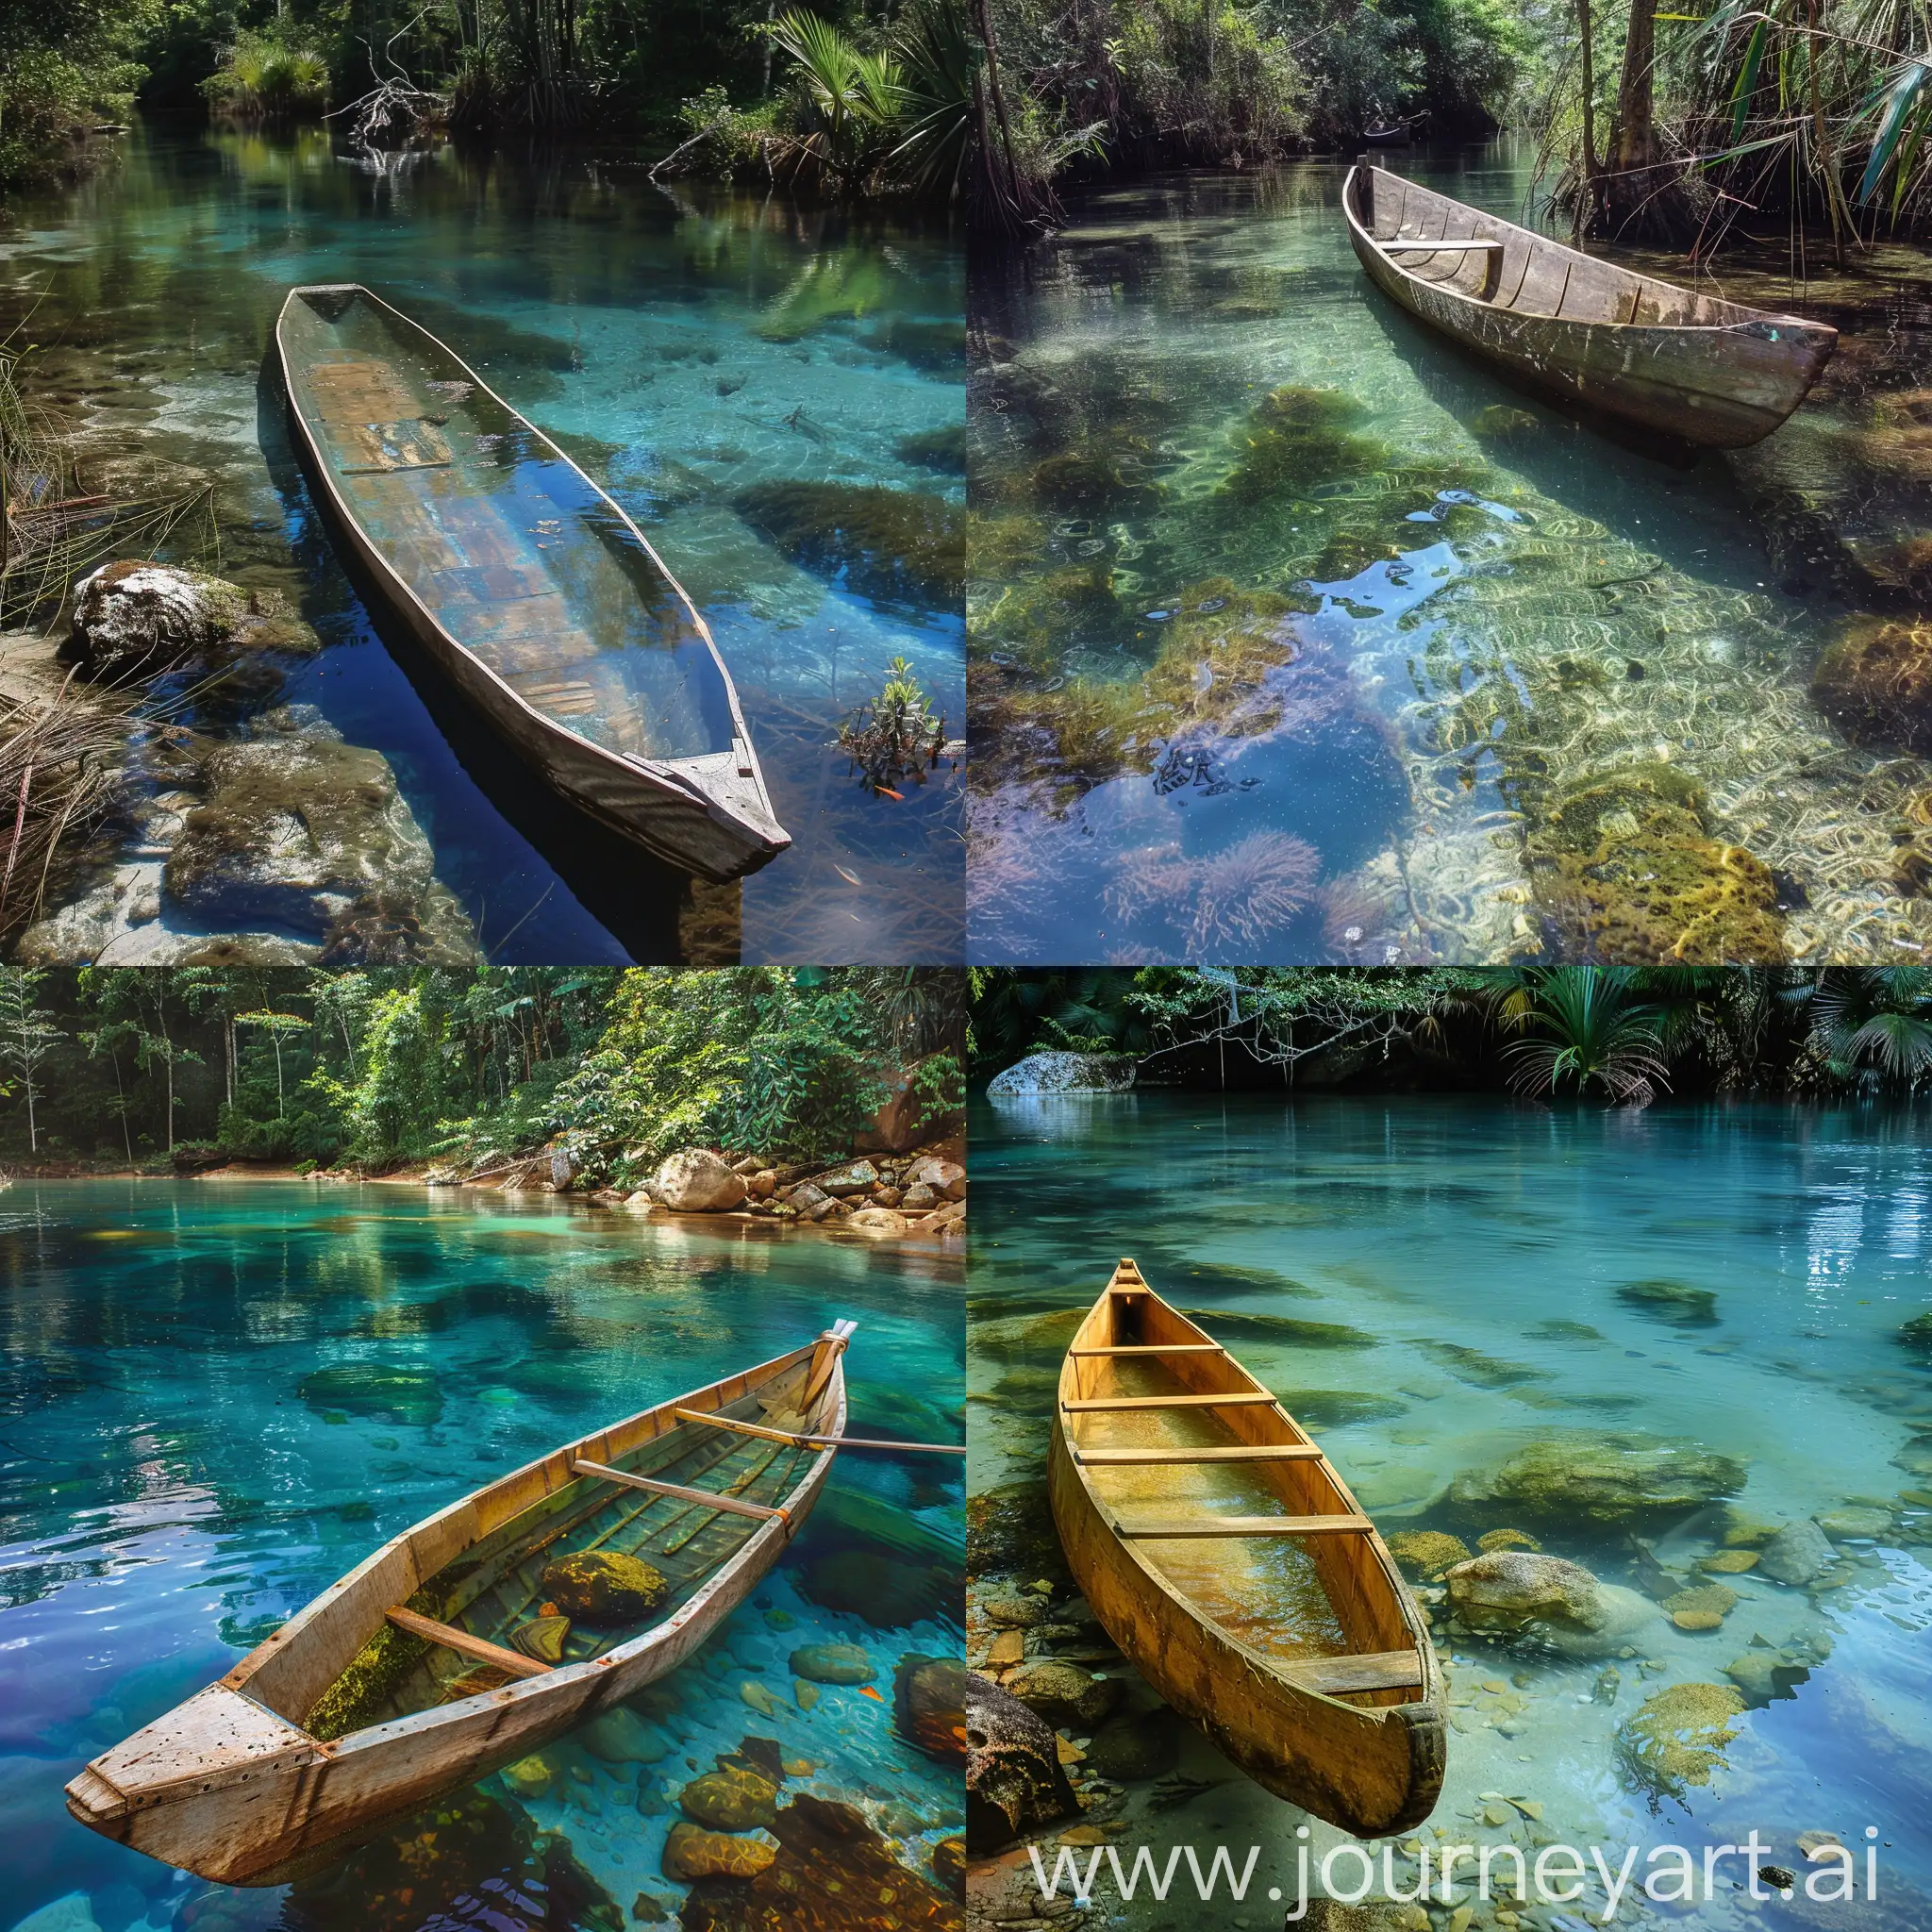 Tranquil-Amazon-River-Scene-with-Wooden-Pirogue